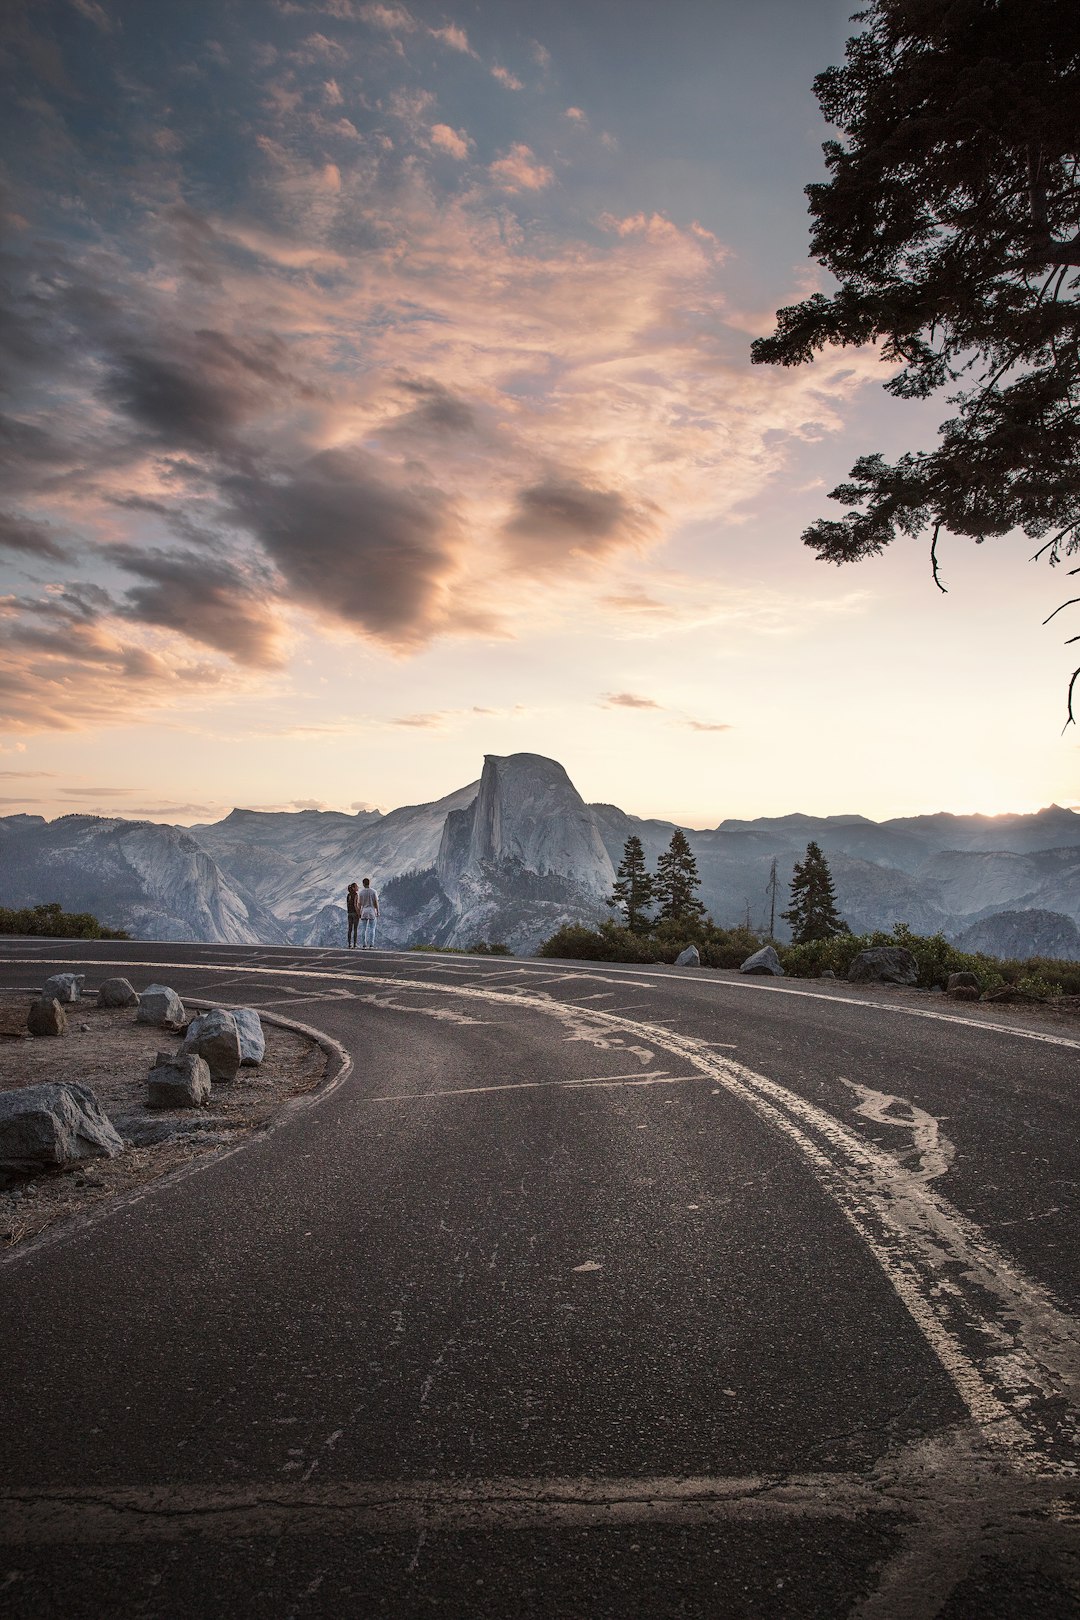 A couple standing the end of a long road during sunrise at Glacier Point in Yosemite National Park, California.

Explore more at explorehuper.com
